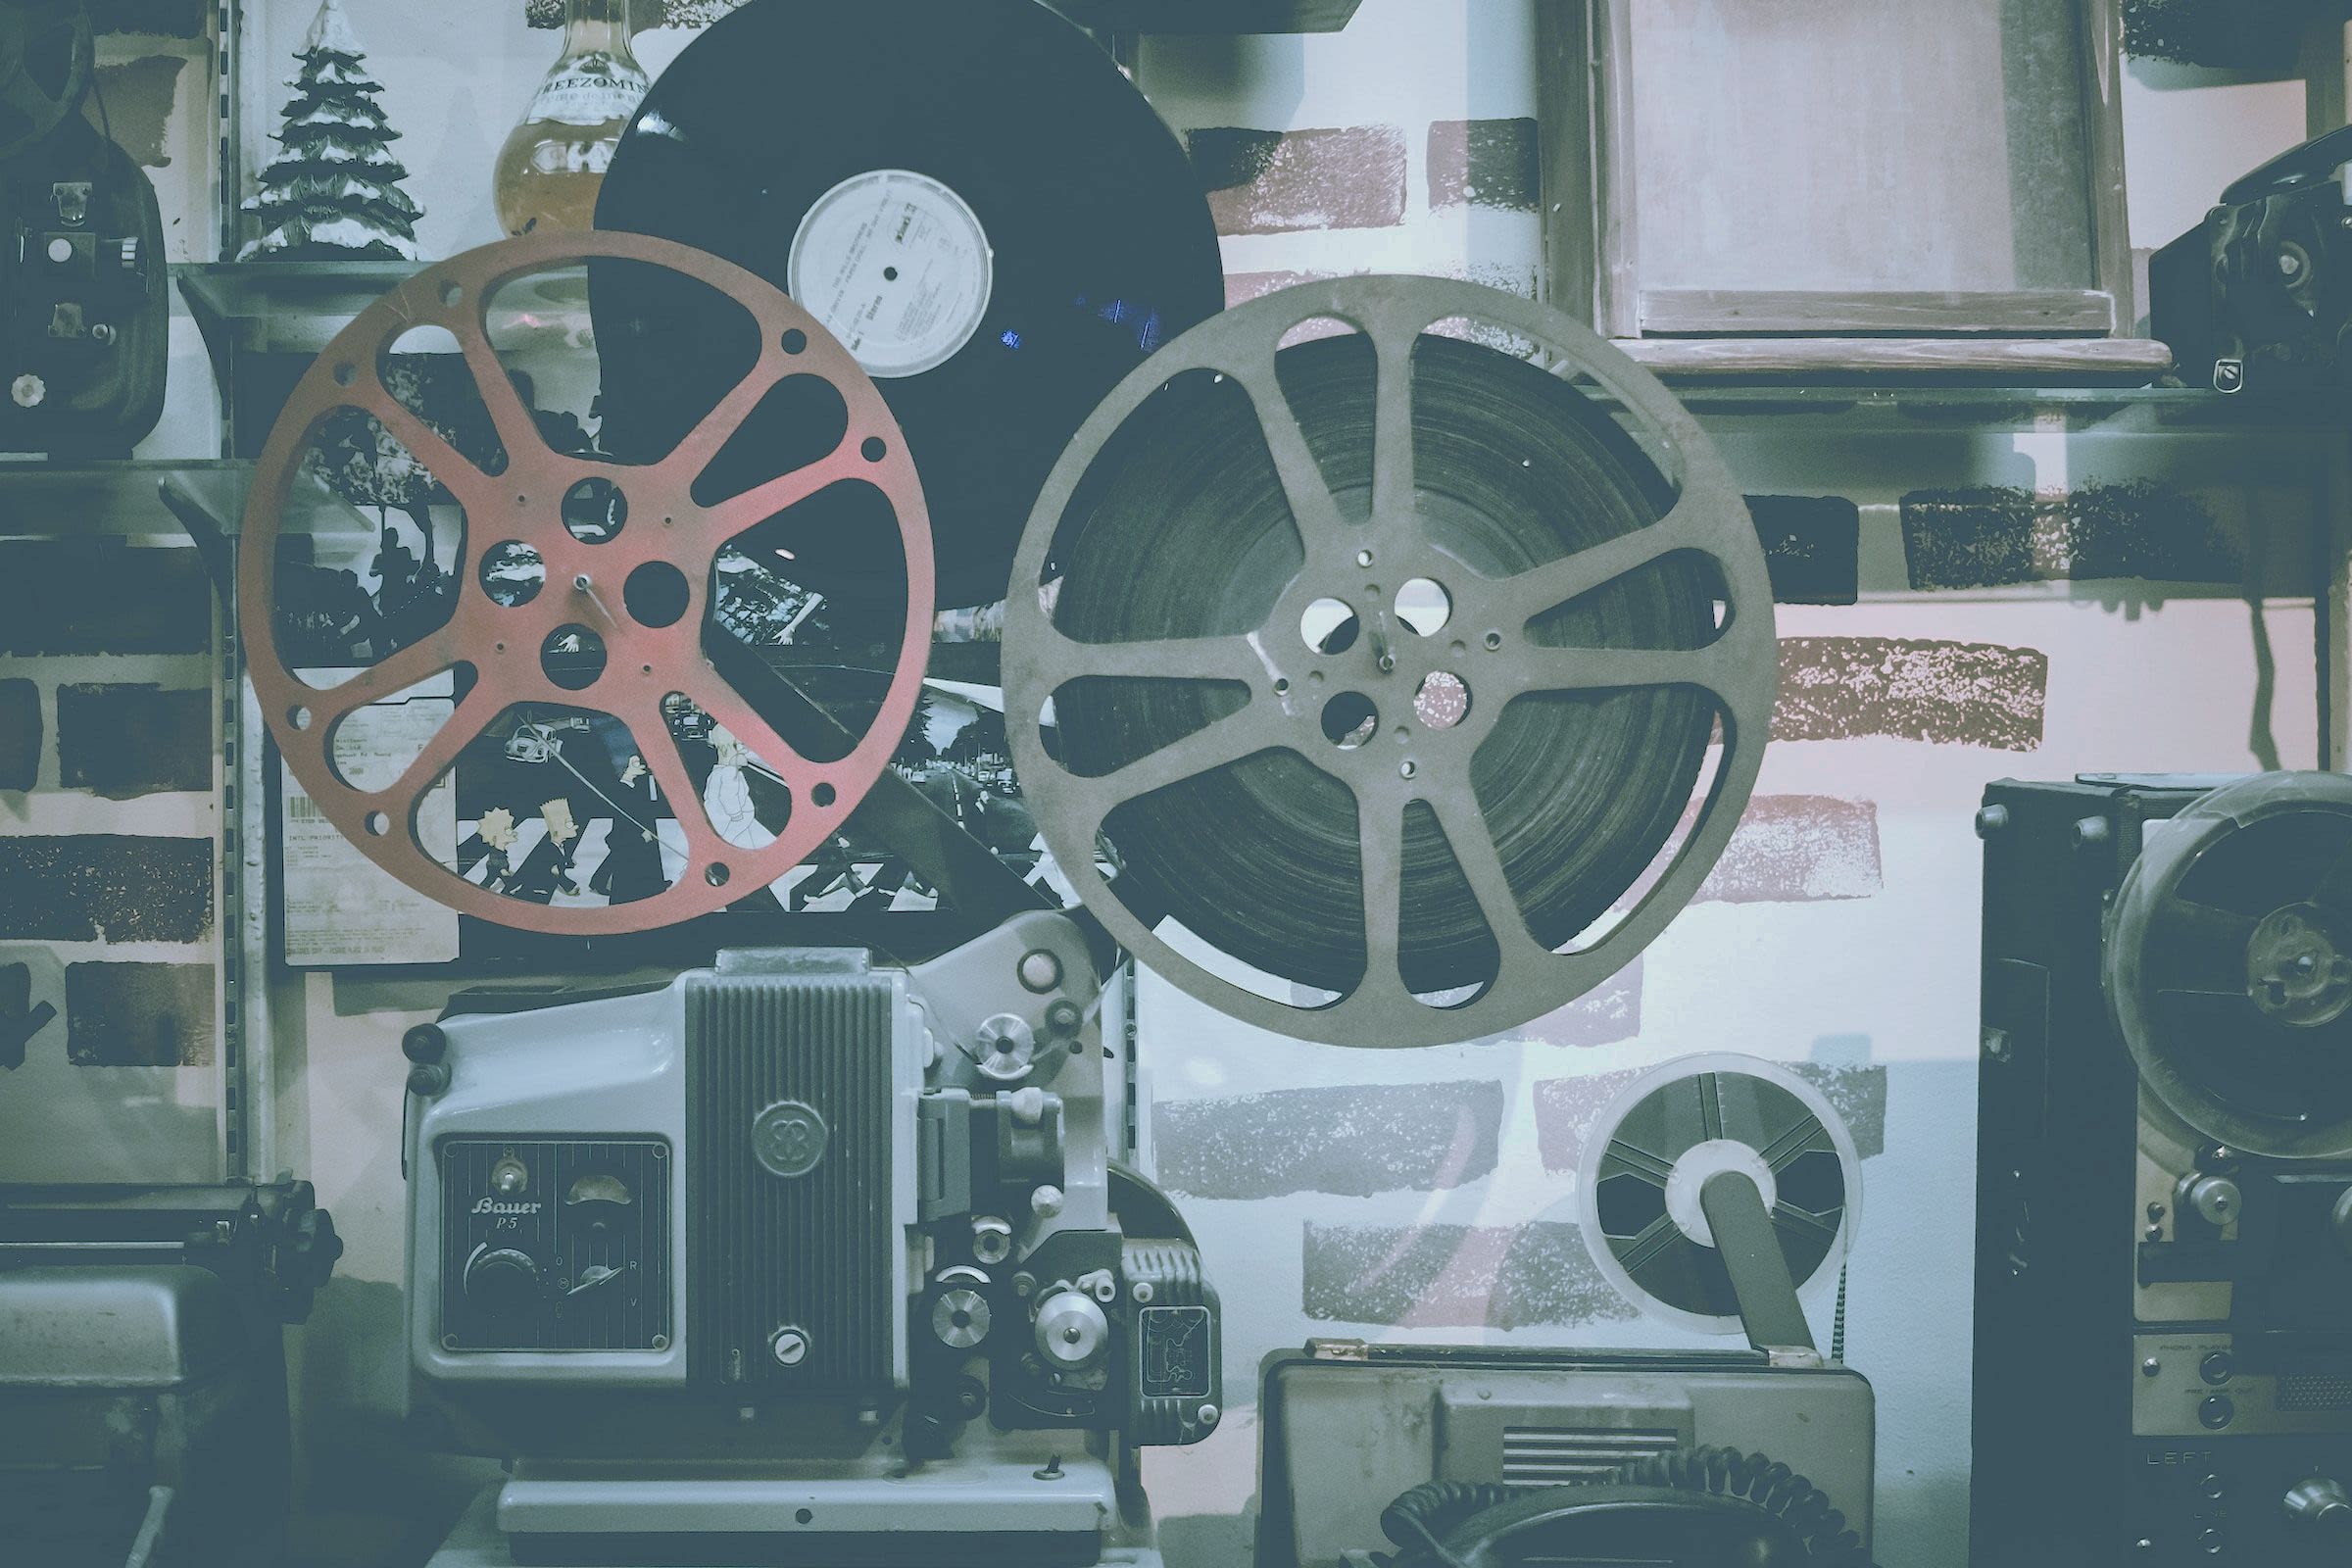 Film Projector and Reels by Noom Peerapong on Unsplash